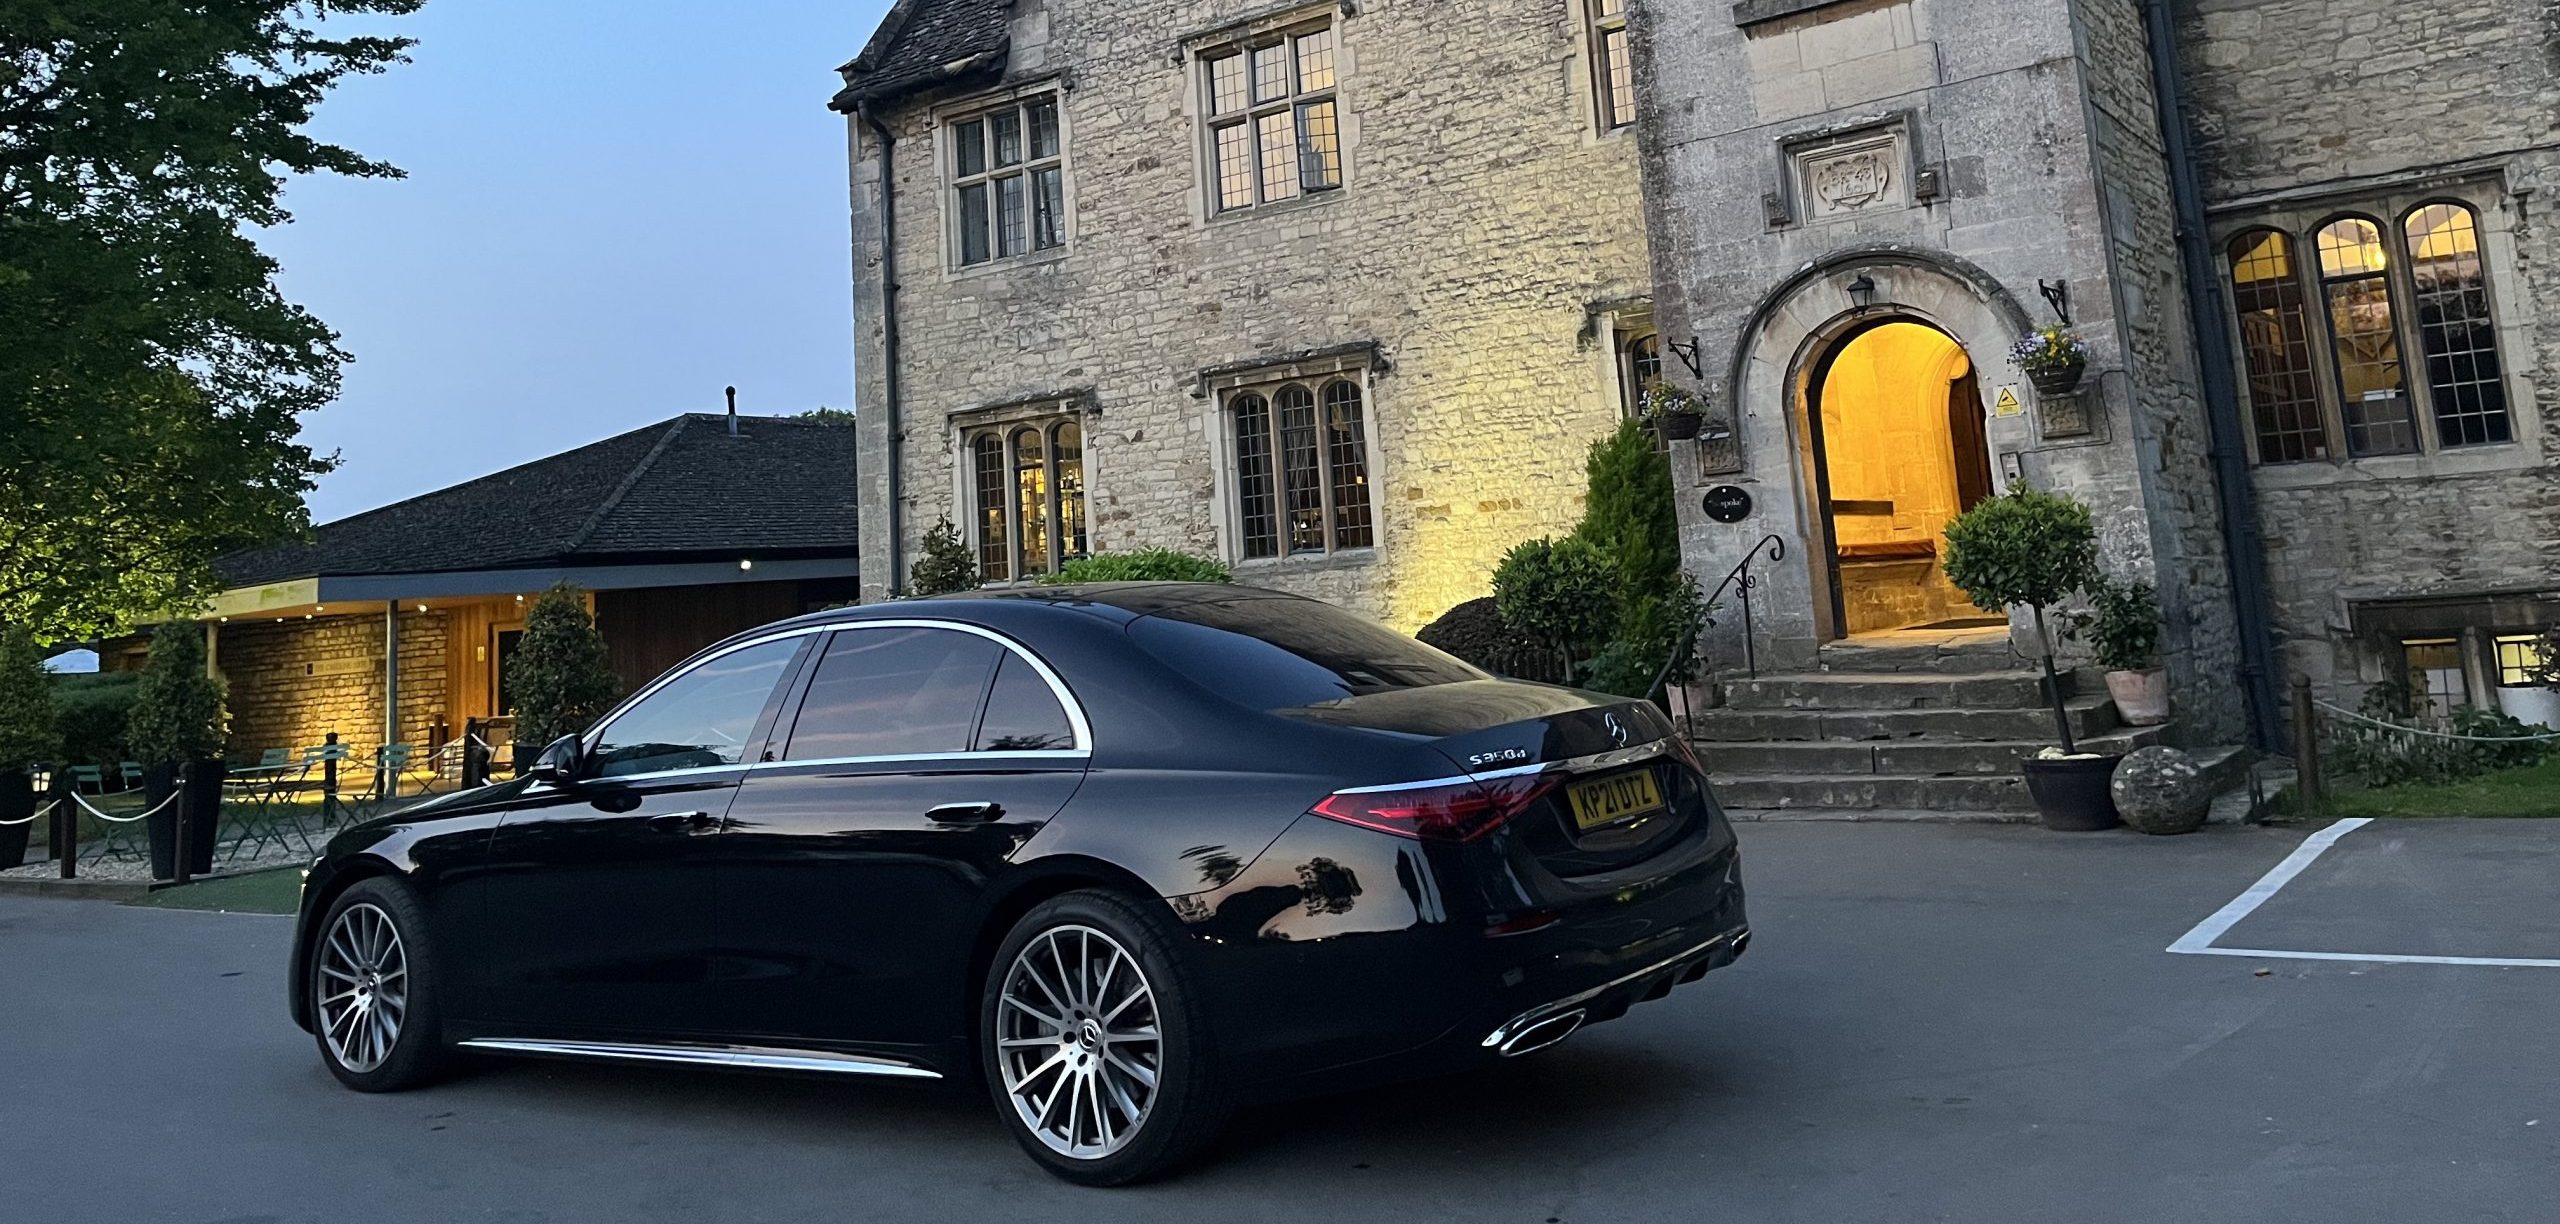 Stonehouse Manor Hotel Chauffeured Car Services